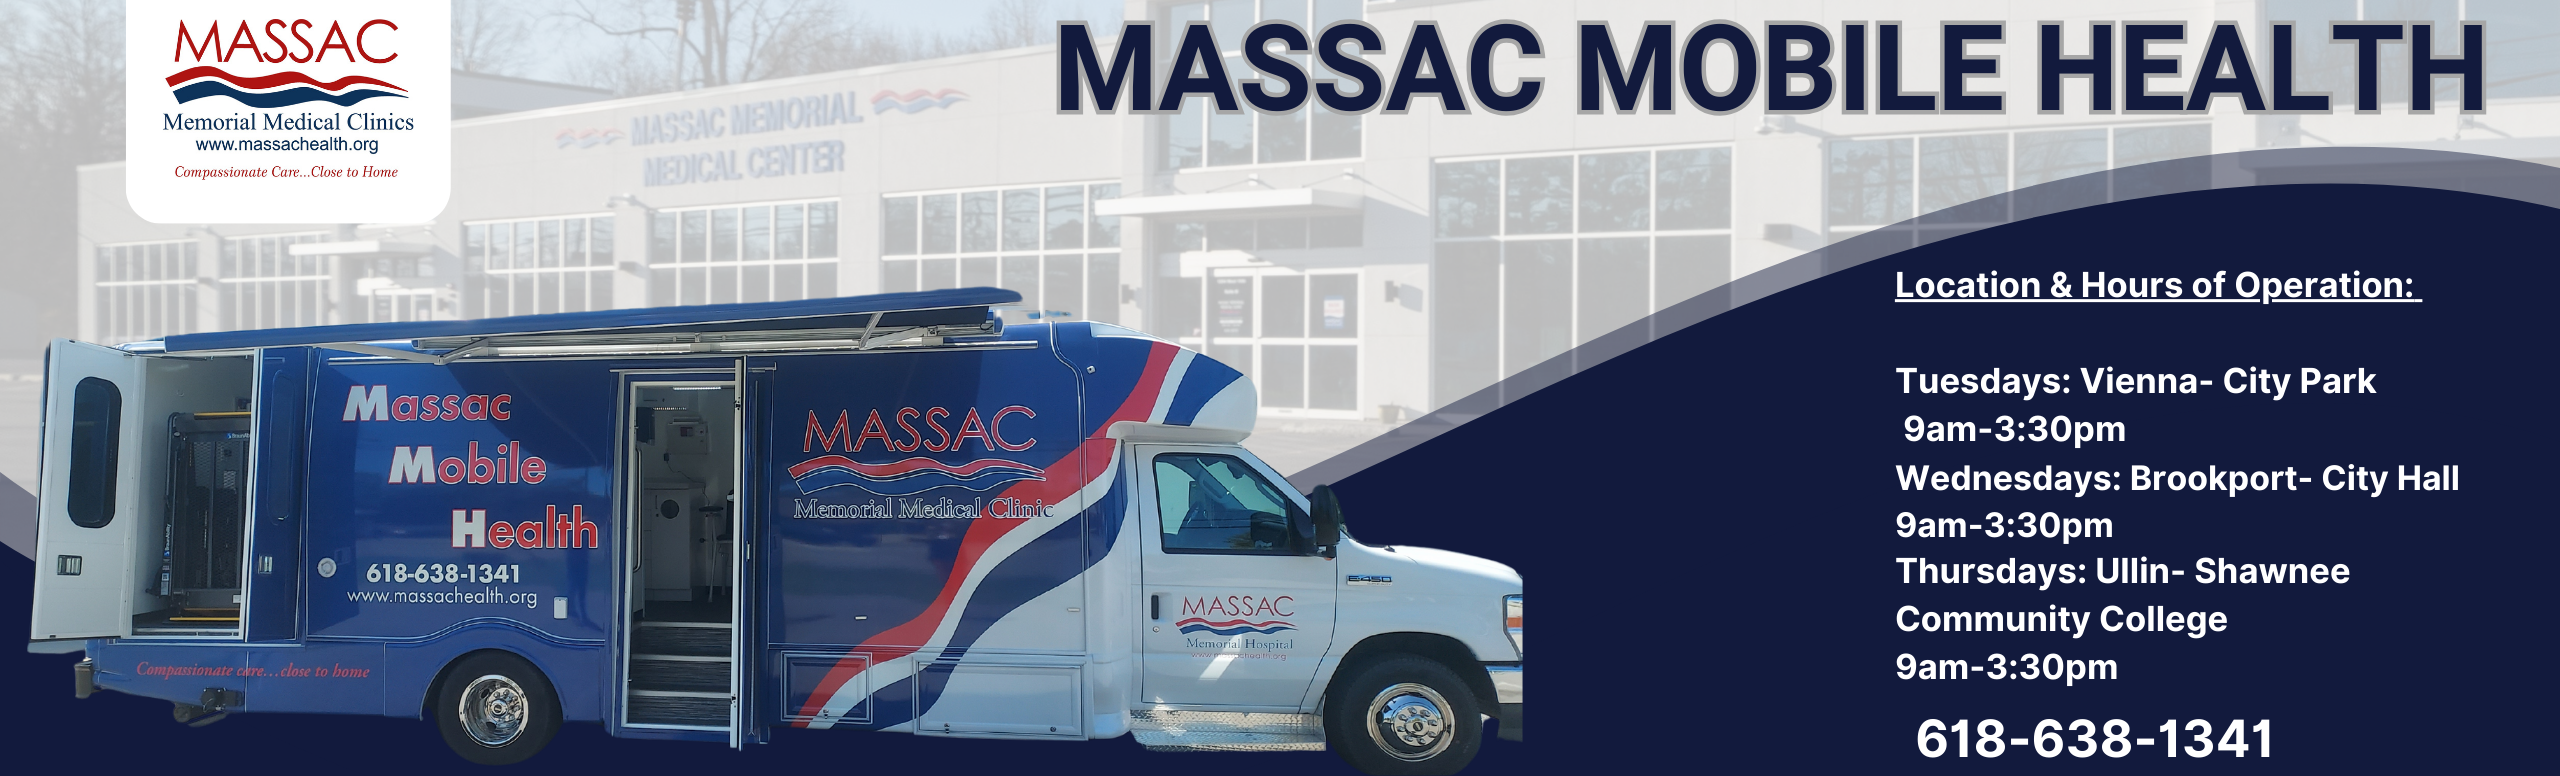 Pictured is our new Massac Mobile Health Vehicle

Coming to a Town Near You!

Location & Hours of Operation 
Tuesdays - Vienna 9am - 3:30pm
Wednesdays - Brookport 9am - 3:30pm
Thursdays - Golconda 9am - 3:30pm
Call Today to schedule your Appointment
618-638-1341